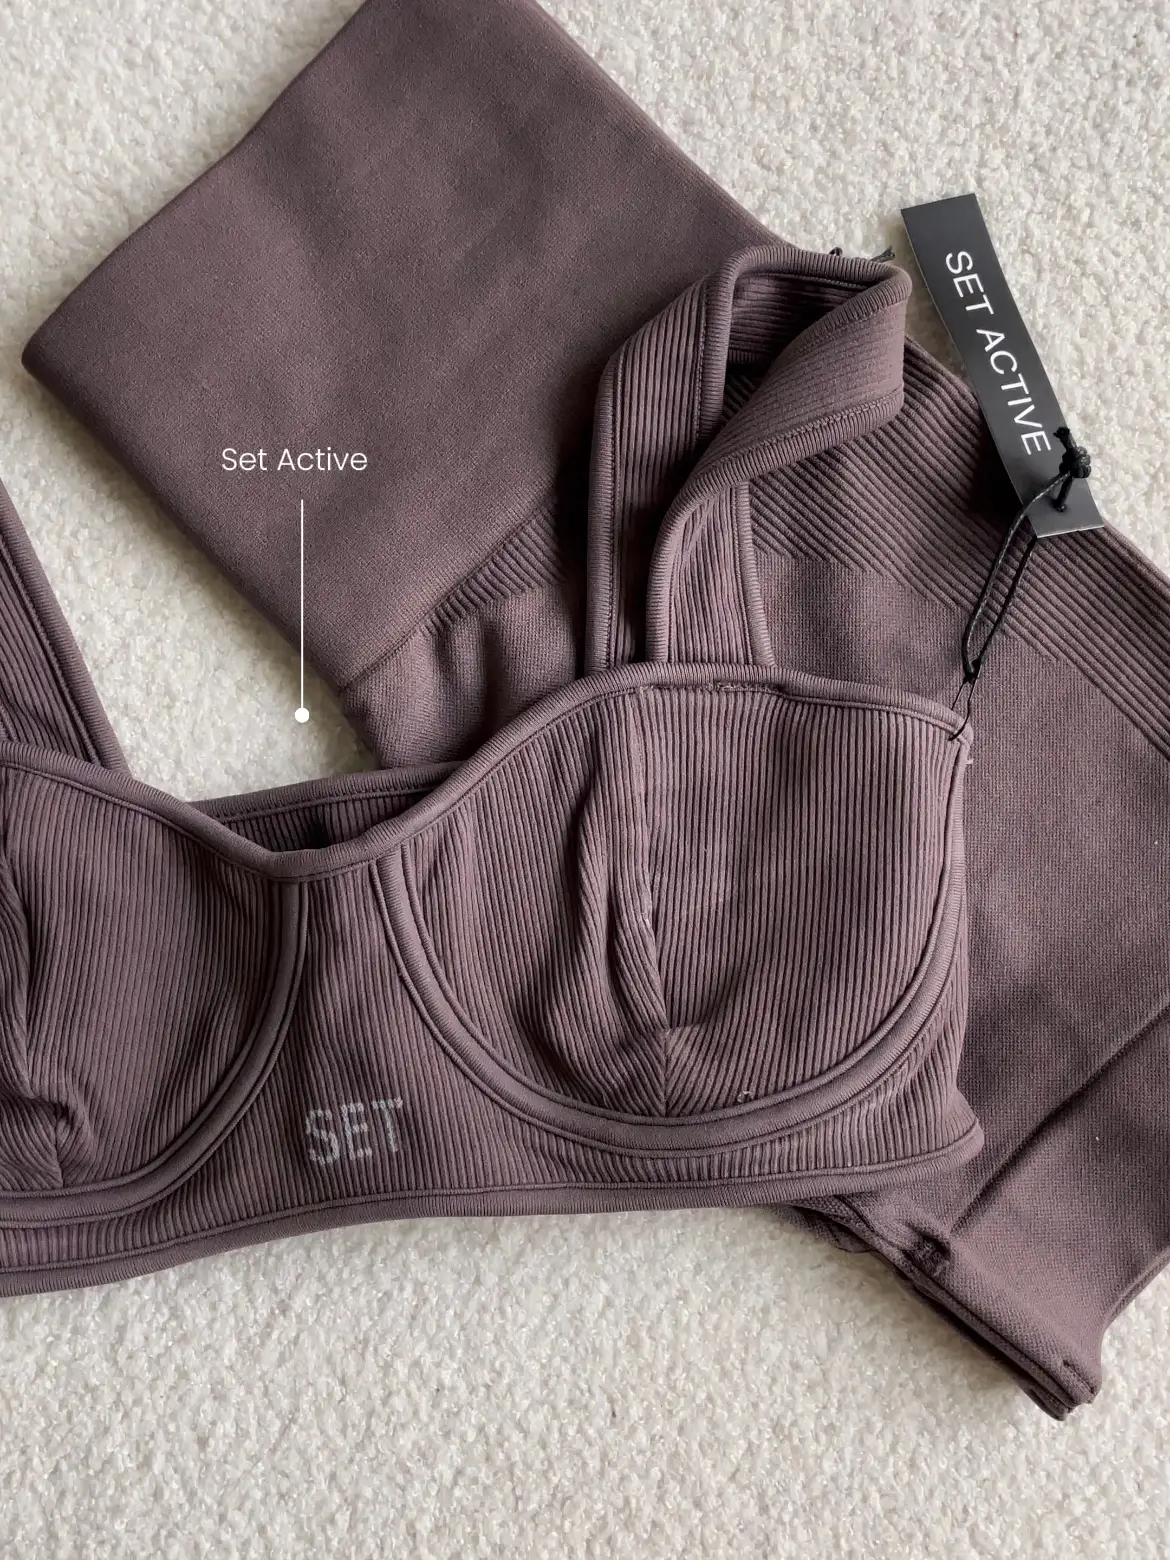 Knix pullover seamless bras 🤤🤤 so comfortable and cute ! This is